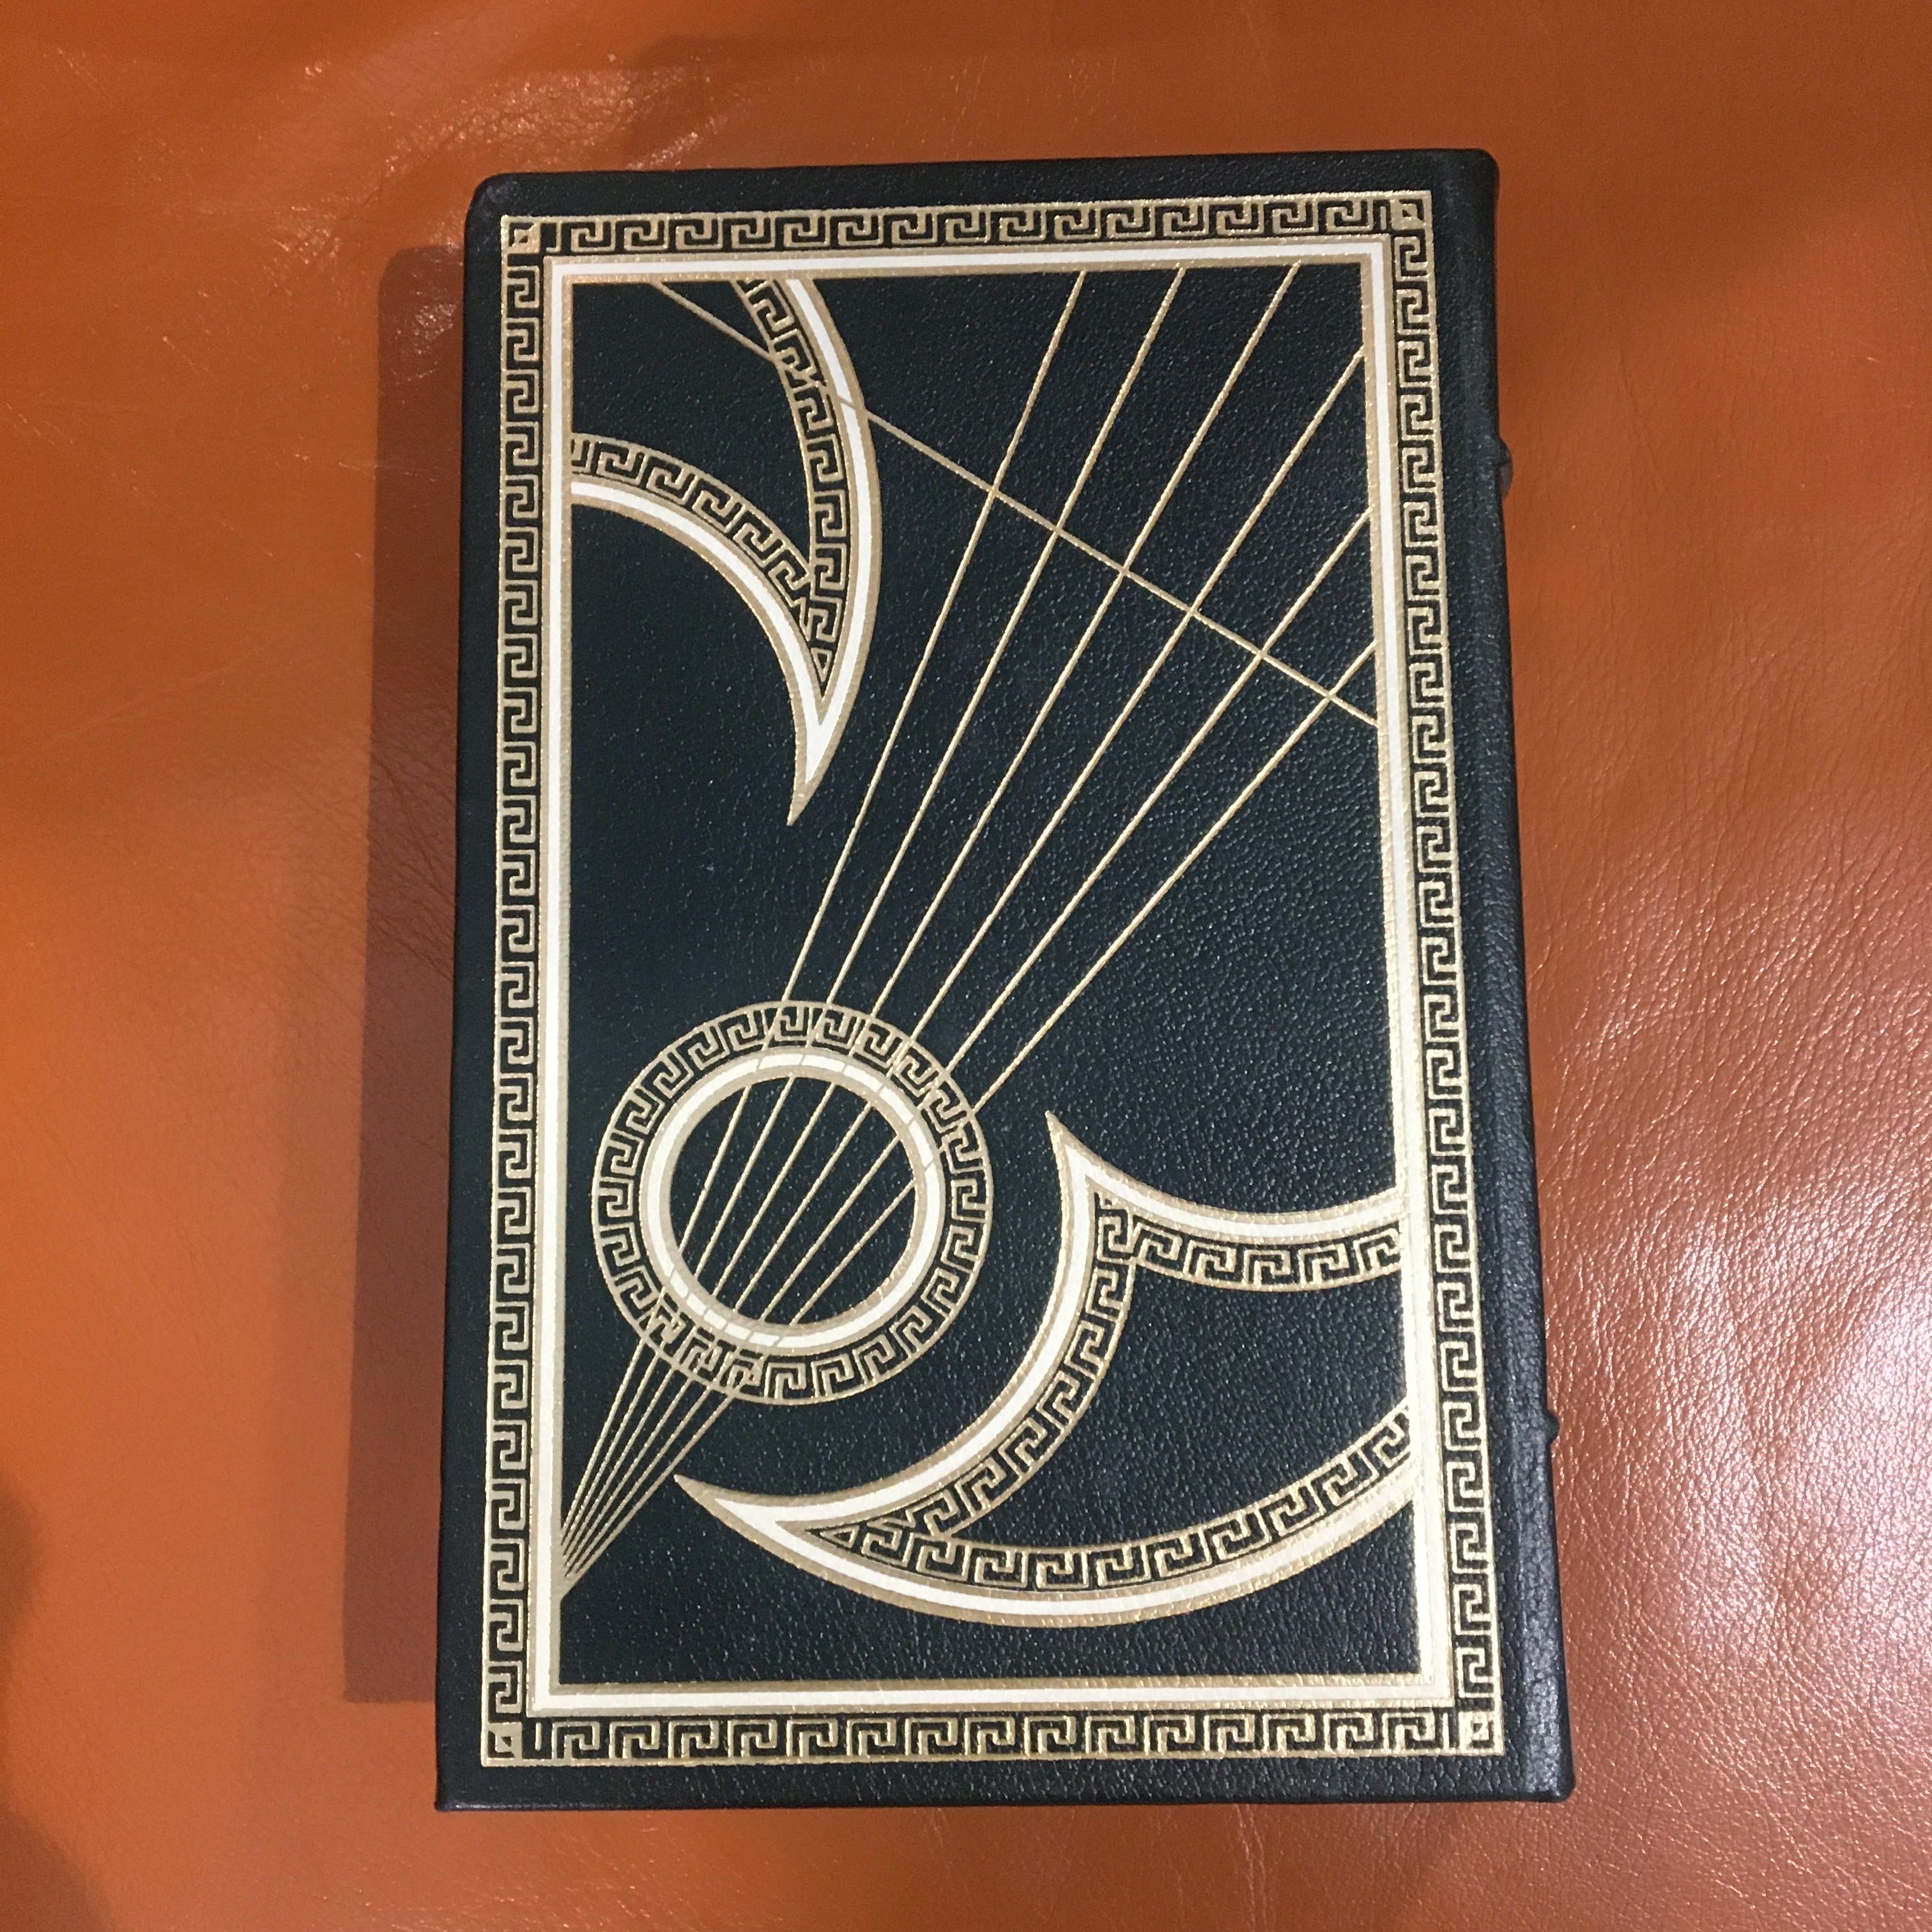 The Lyre of Orpheus Signed Limited 1st Edition Robert Davies